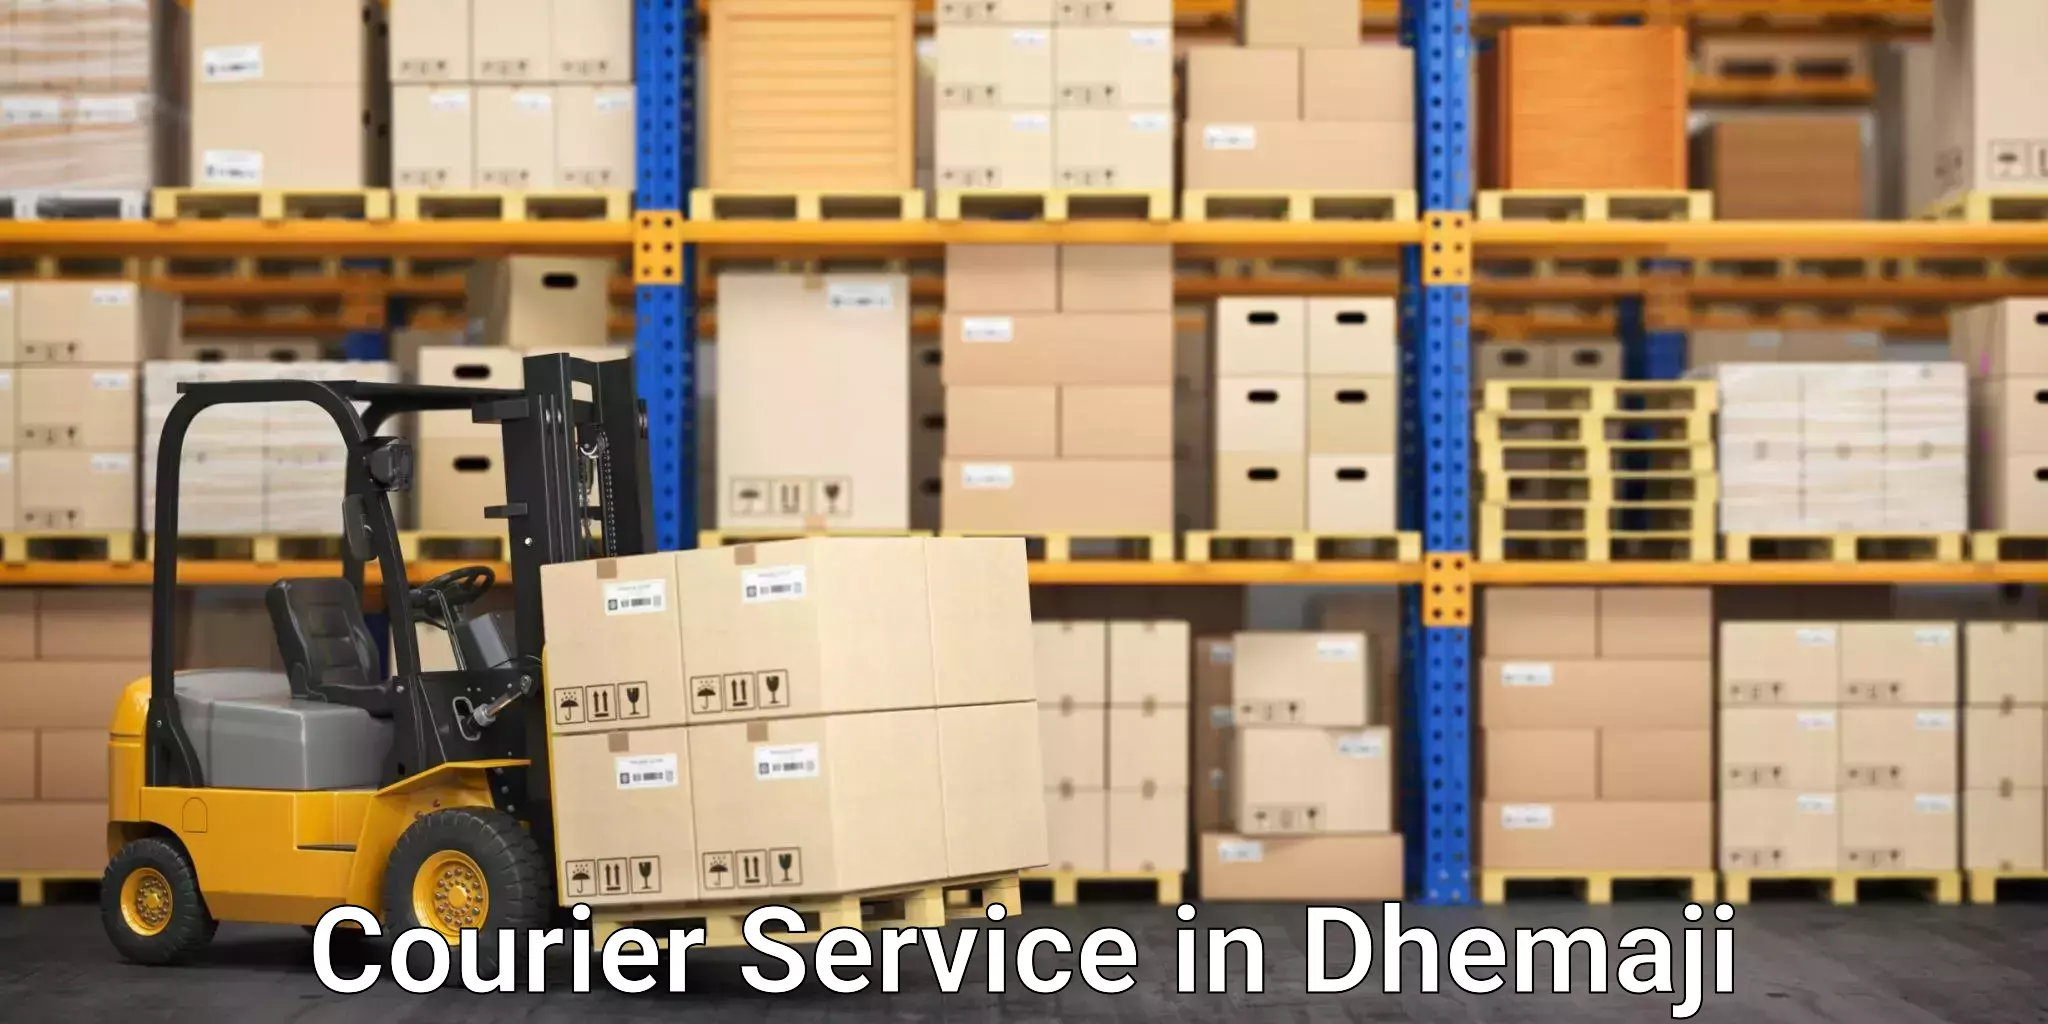 Customer-oriented courier services in Dhemaji